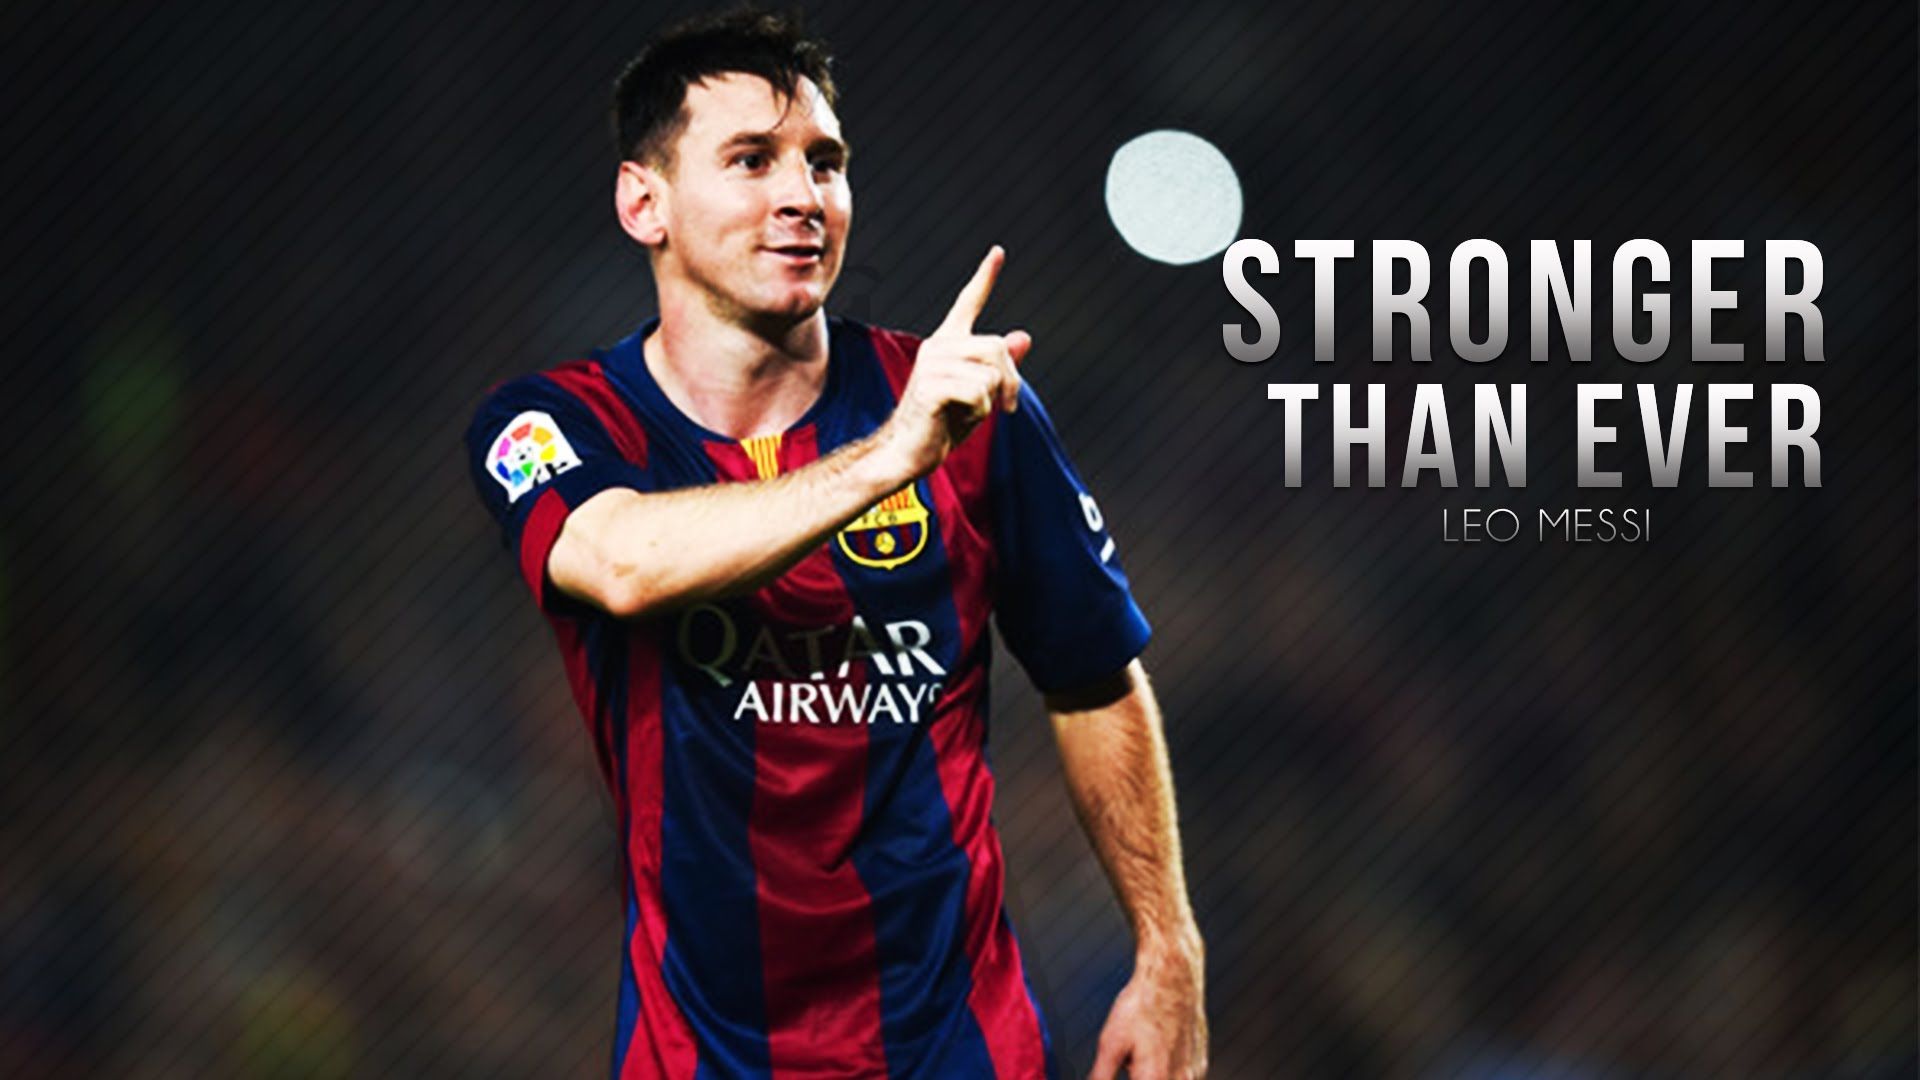 Lionel Messi 2015 Full HD Pics Wallpapers 8434 - HD Wallpapers Site